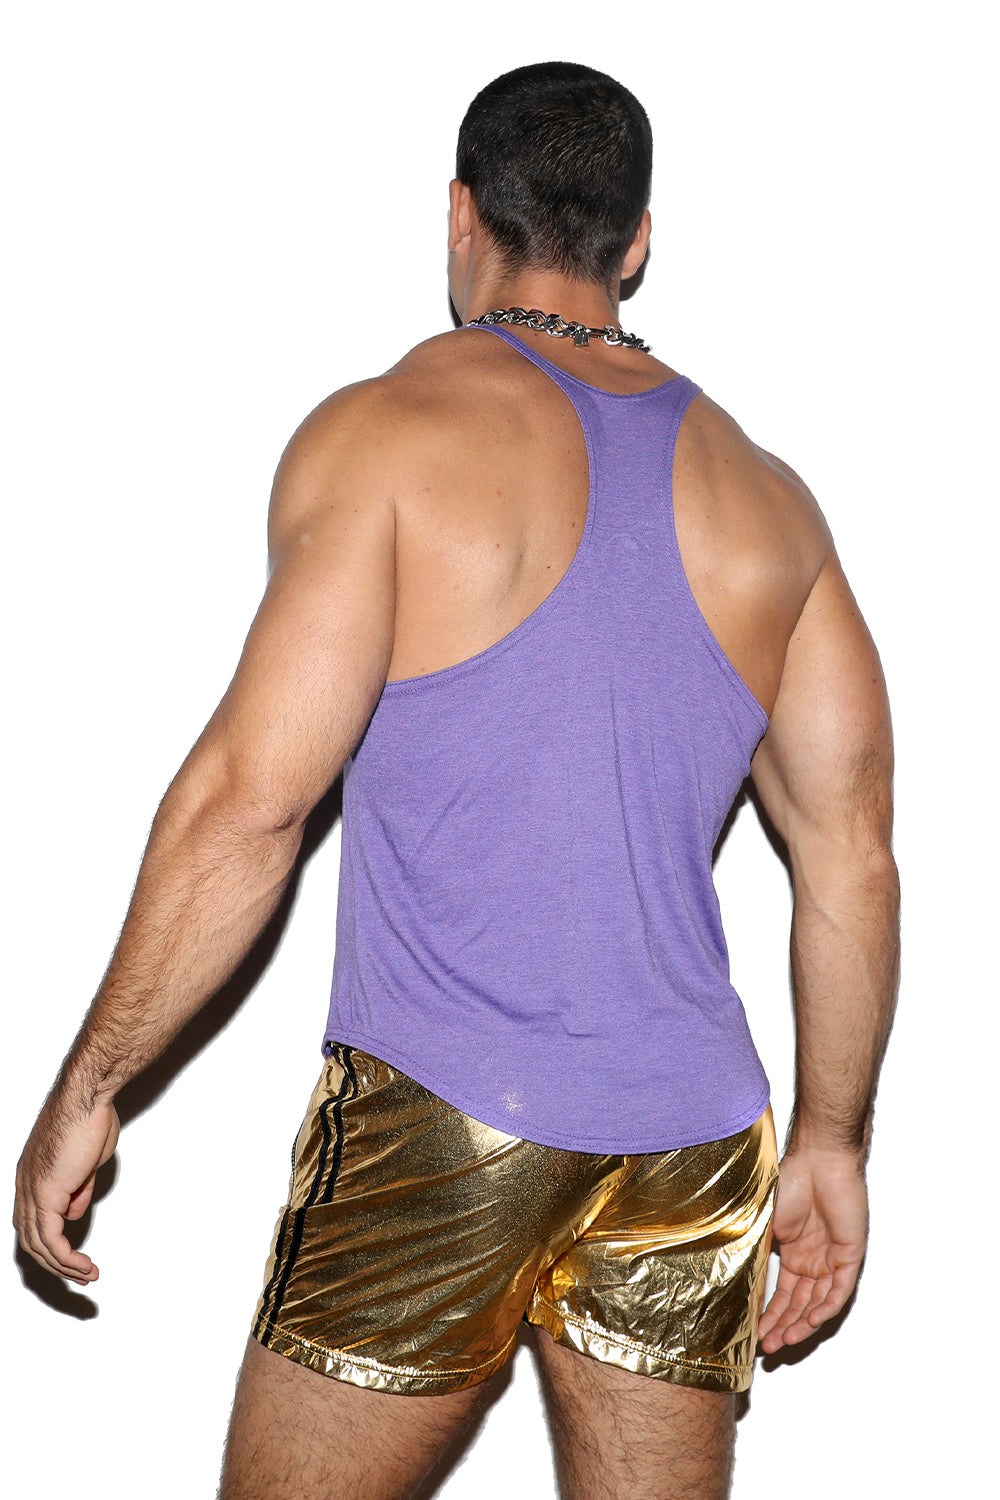 Gold Donkey Butt Shorts (Pre-Order Ship Late May maybe sooner)